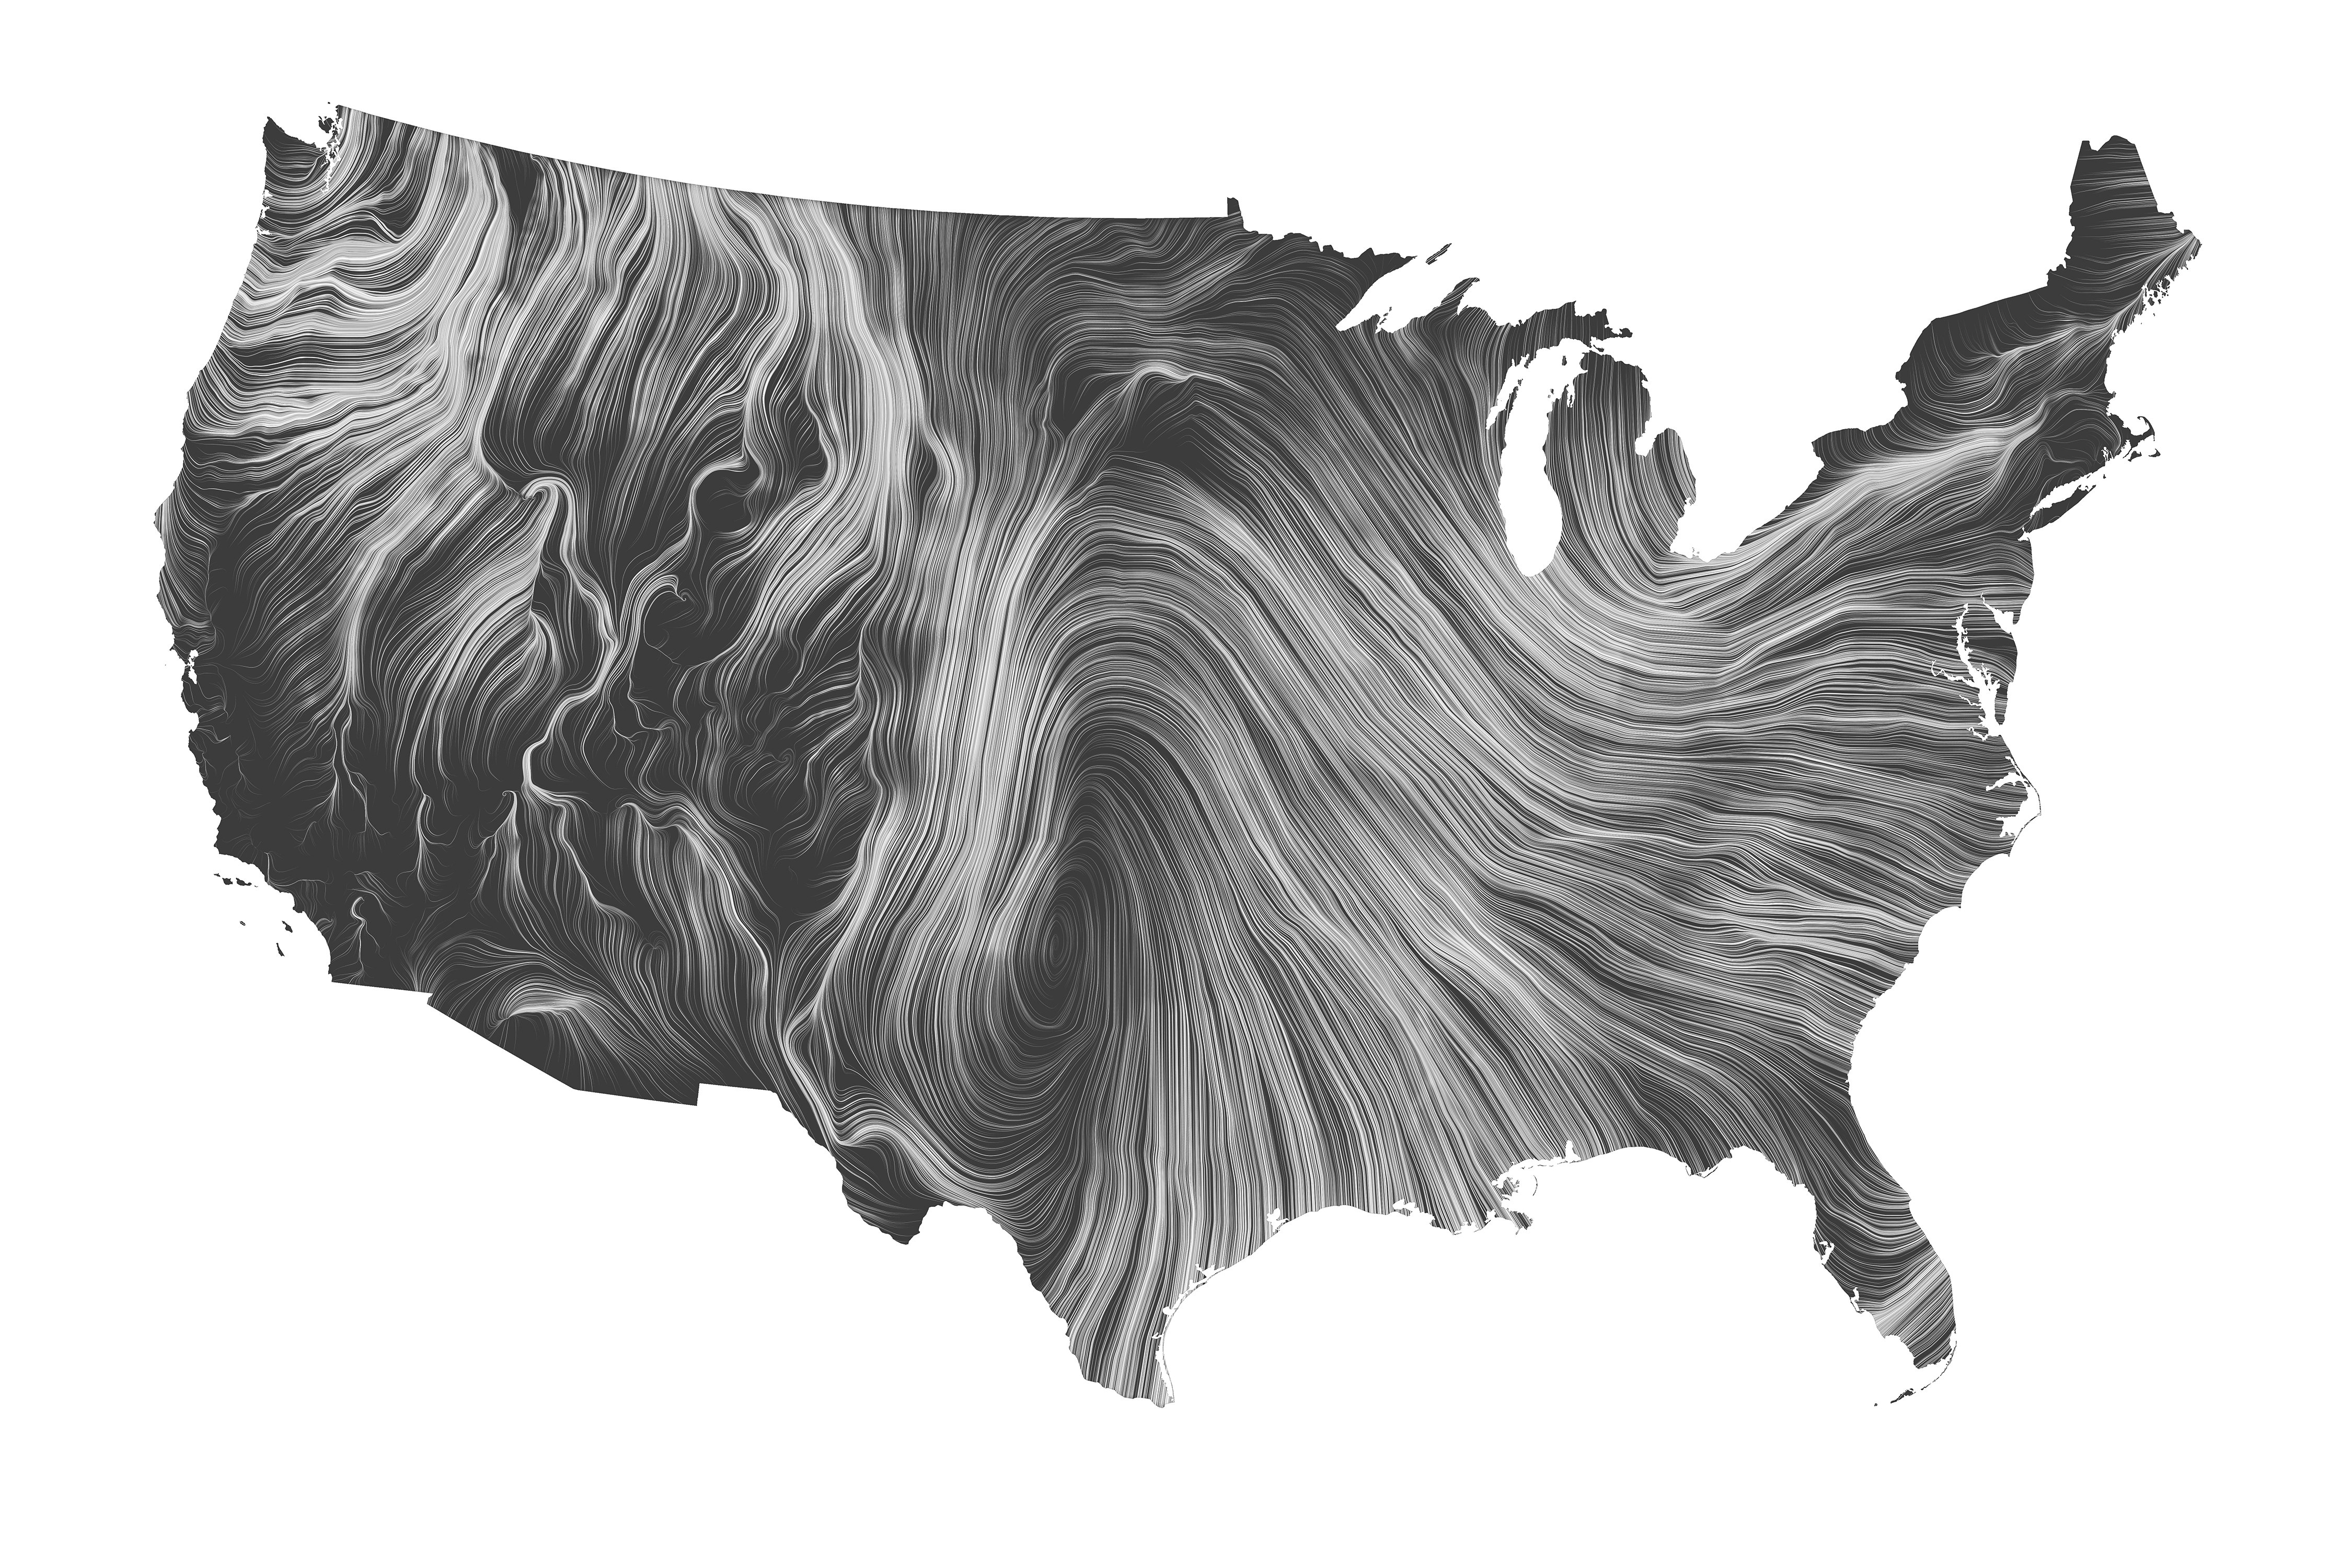 Black-and-white map of the United State, displaying a visualization of wind patterns similar to the swirls on marble.